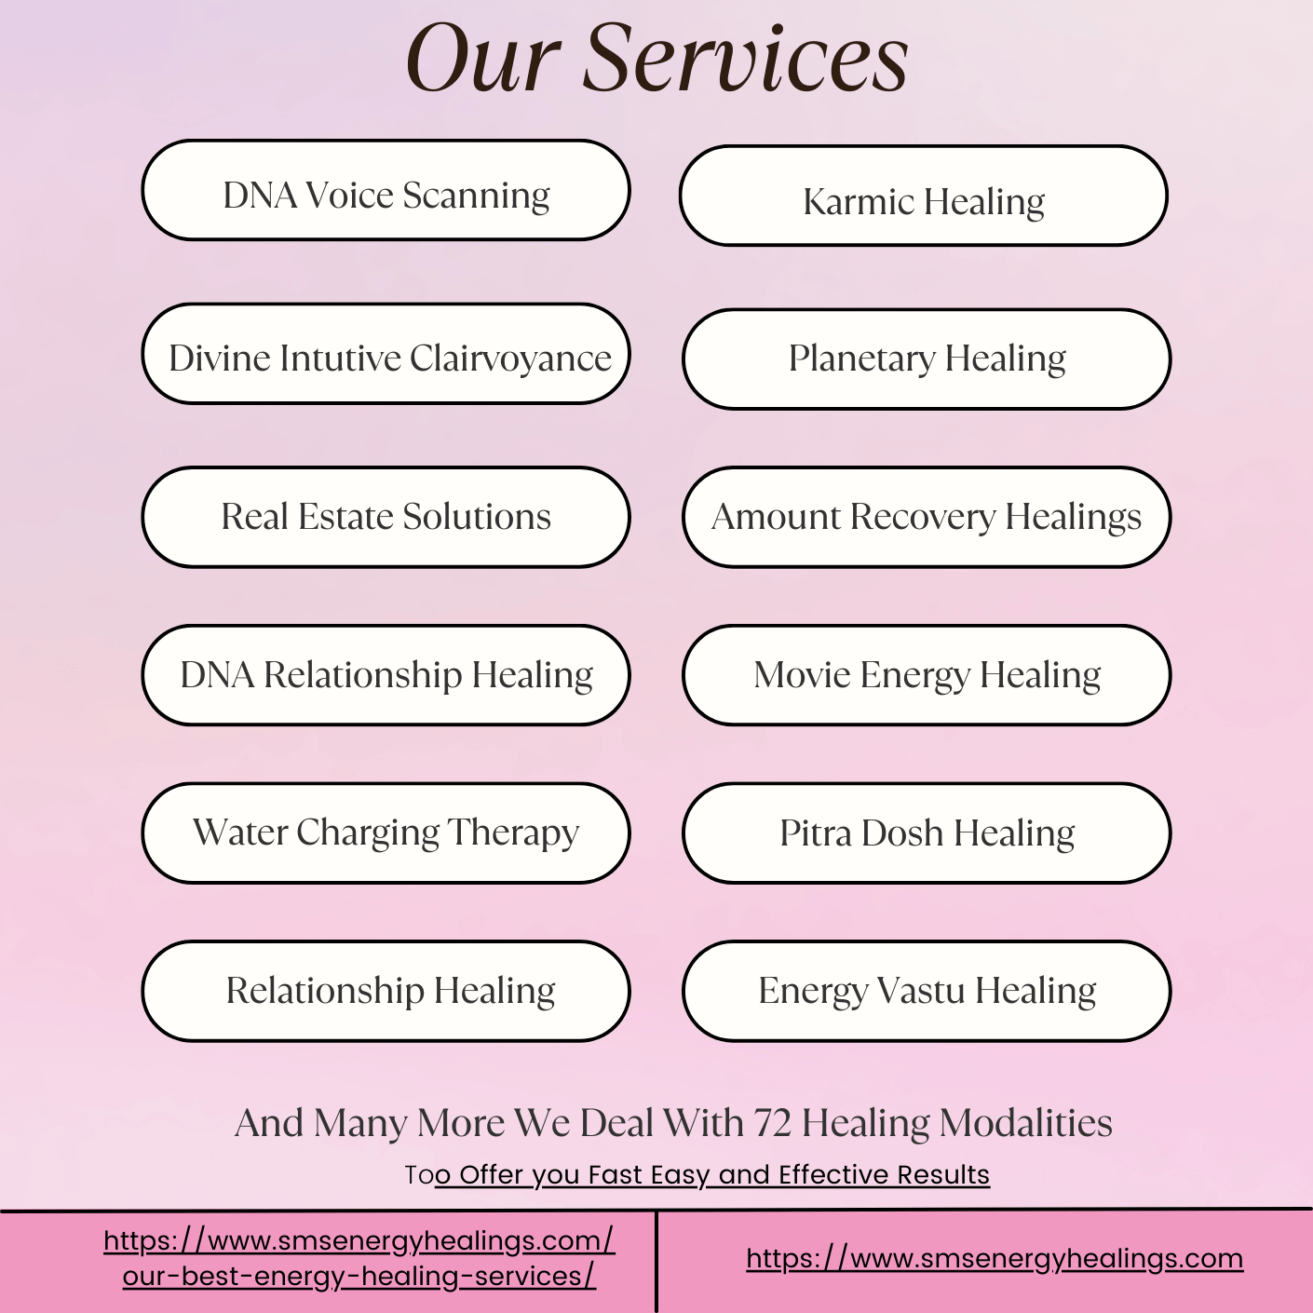 Our Services, Our Best Energy Healing Services